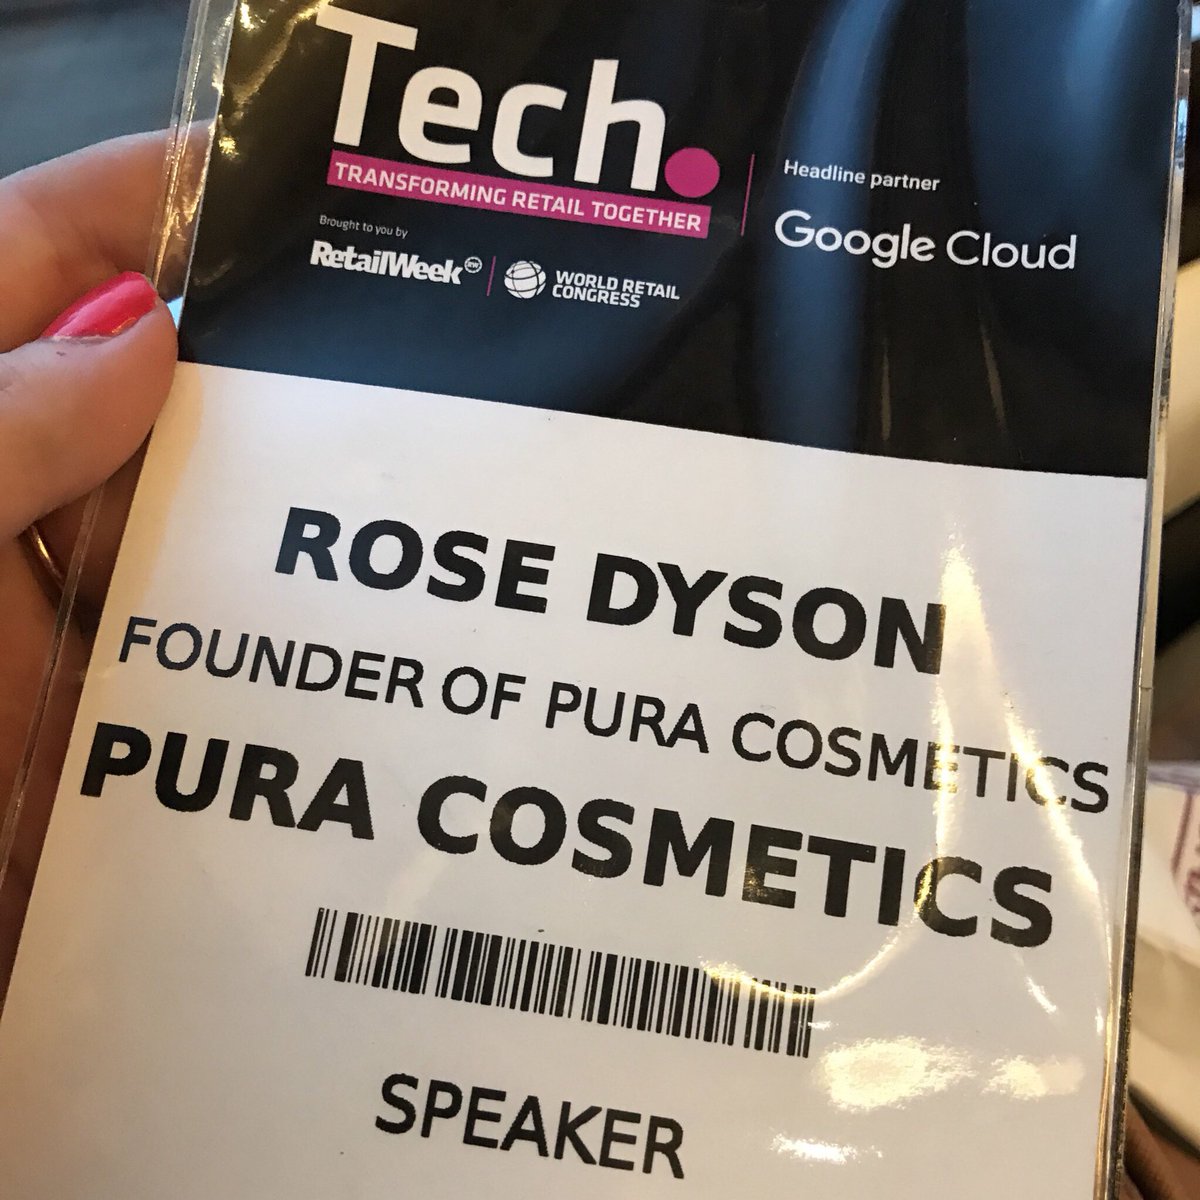 Today I had the pleasure of sharing the @PuraCosmetics story on the Main Stage at Tech. 2018 and taking part on a panel on gen z & teen entrepreneurship alongside the amazing Jenk Oz @iCoolKidGarage & @HarryCKB of Future Labs! Thanks for having us @RetailWeek! #RWTech 🎙